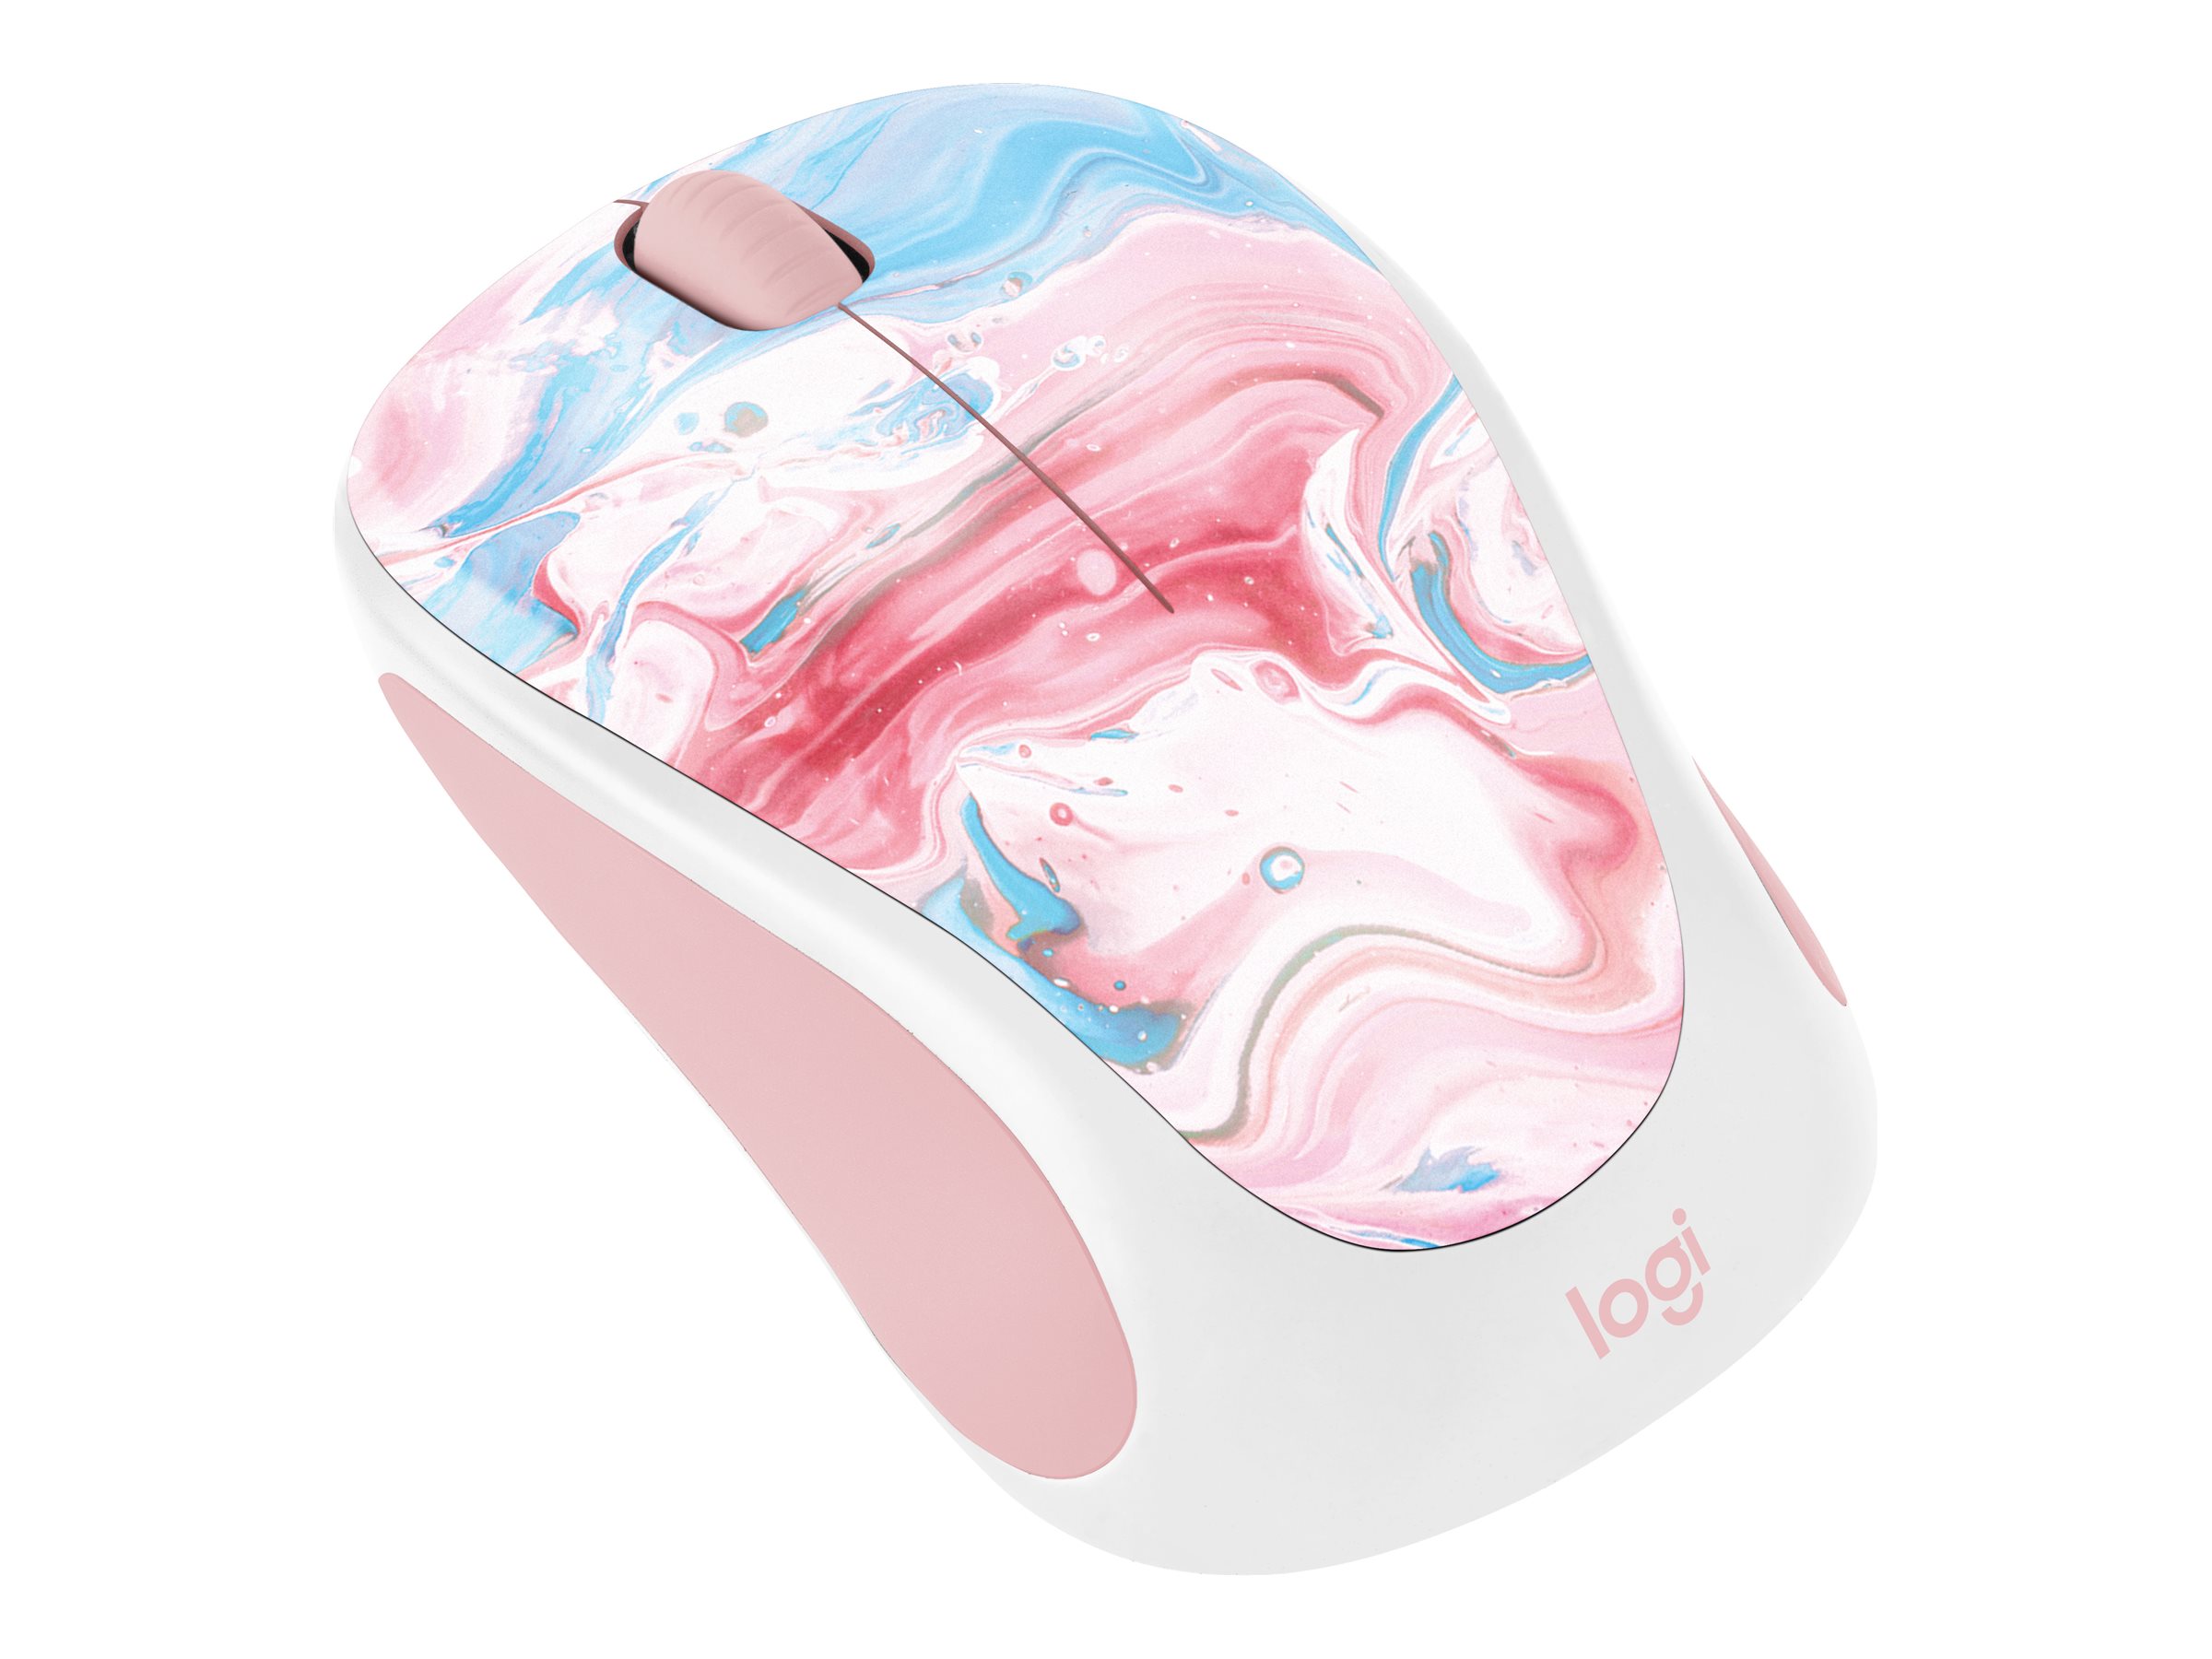 Logitech Design Collection Limited Edition Wireless Mouse - Cotton Candy -  910-007055